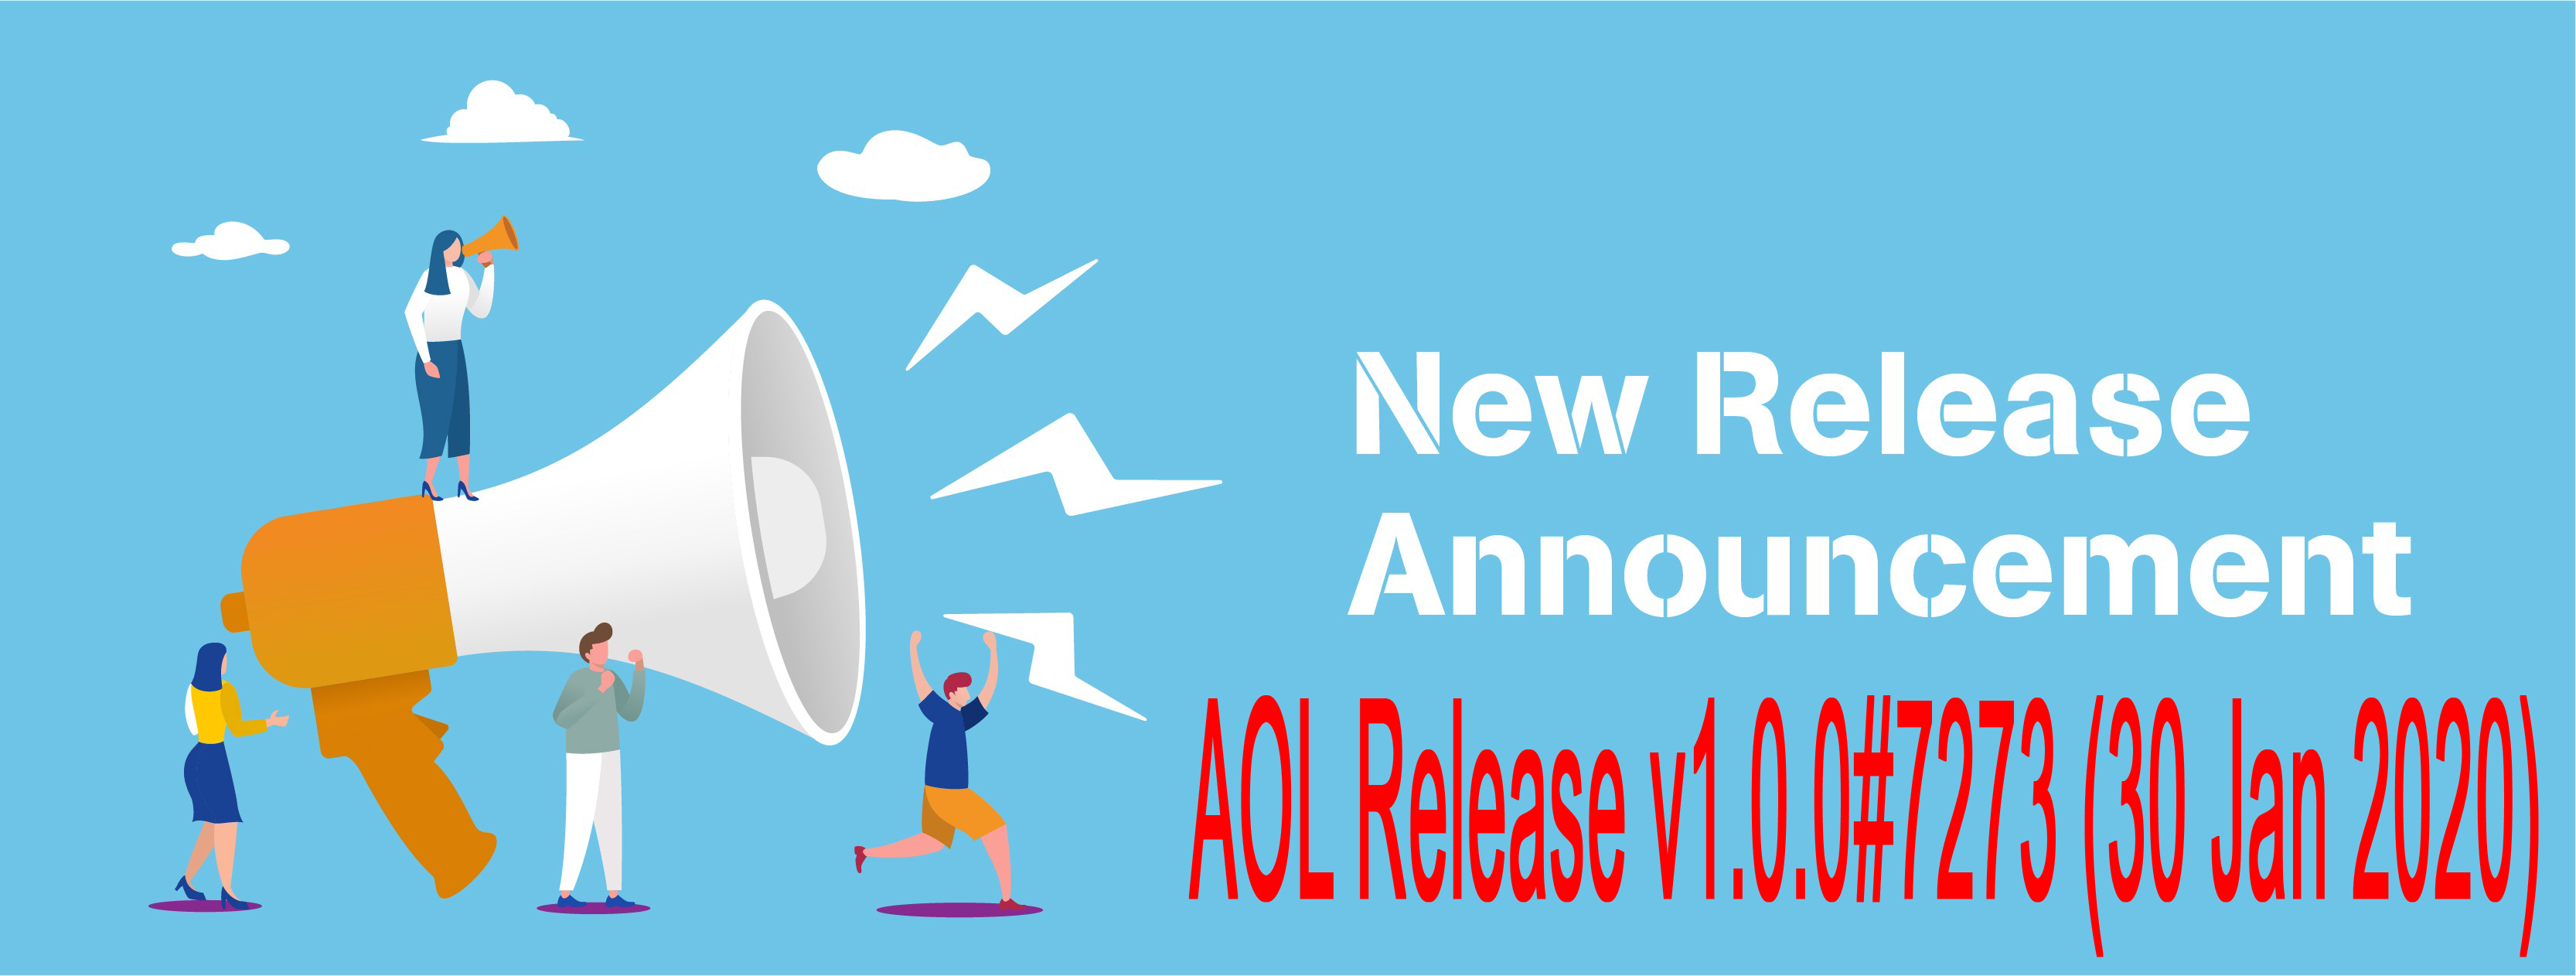 Accurate Online Release v1.0.0#7273 (30 Jan 2020)